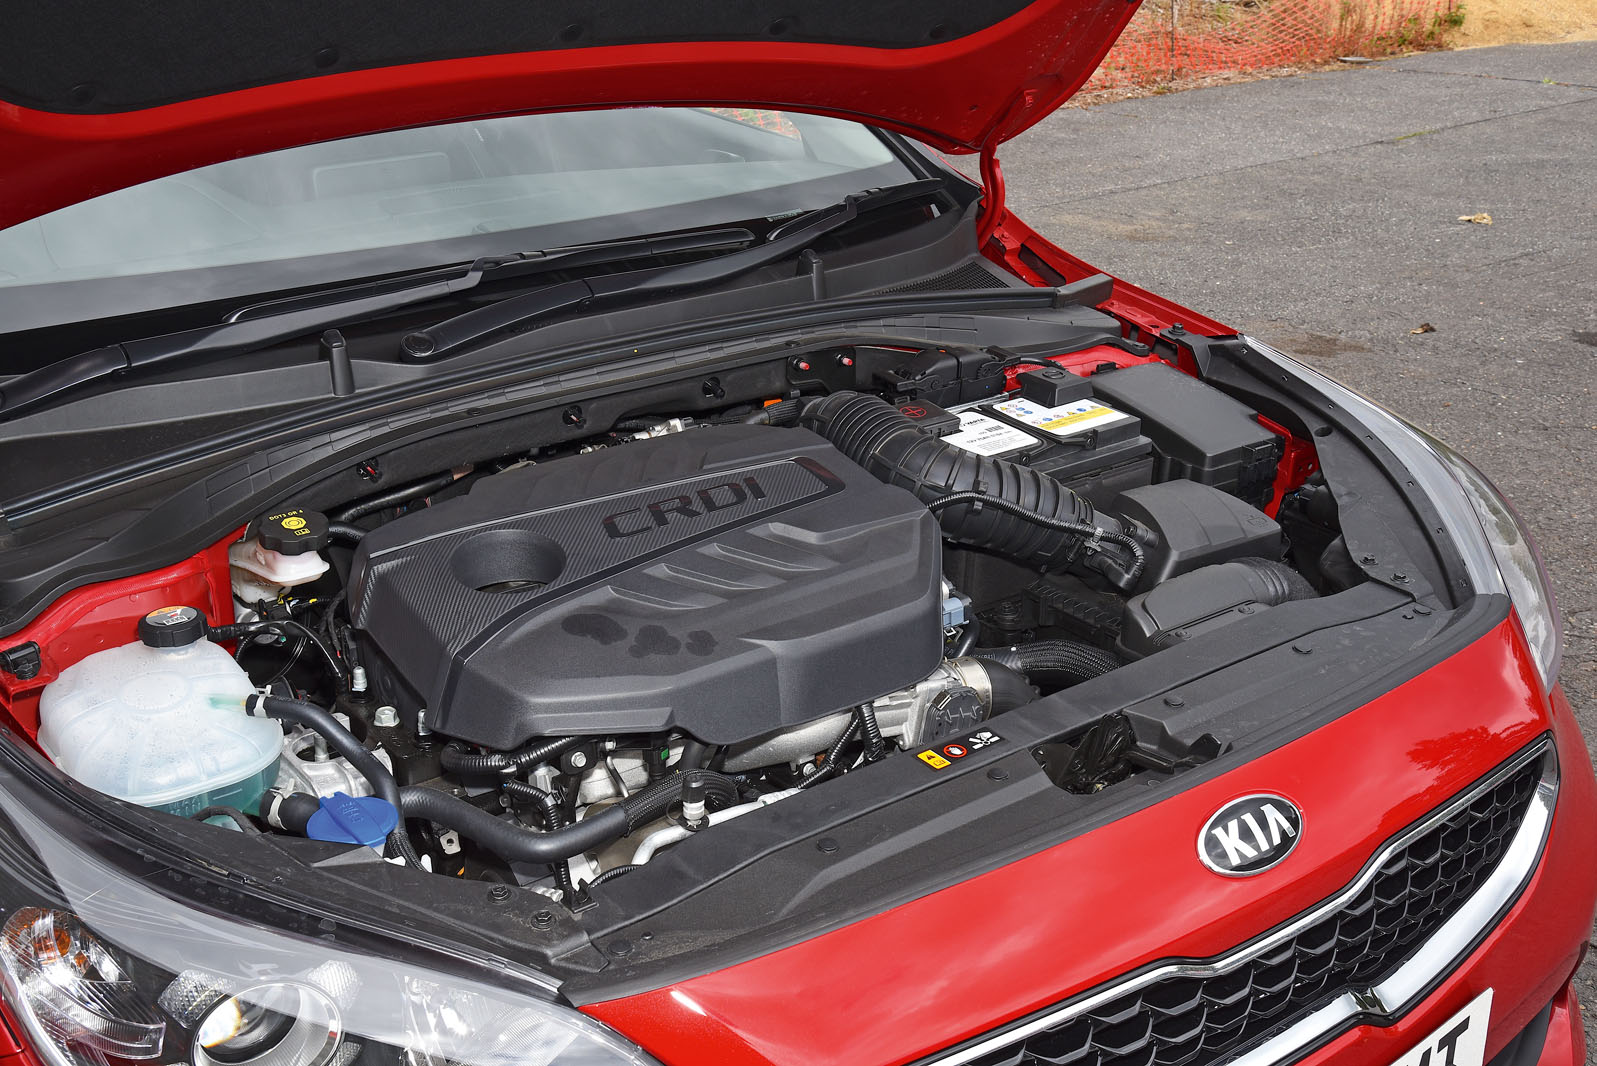 Kia Ceed 2018 road test review engine